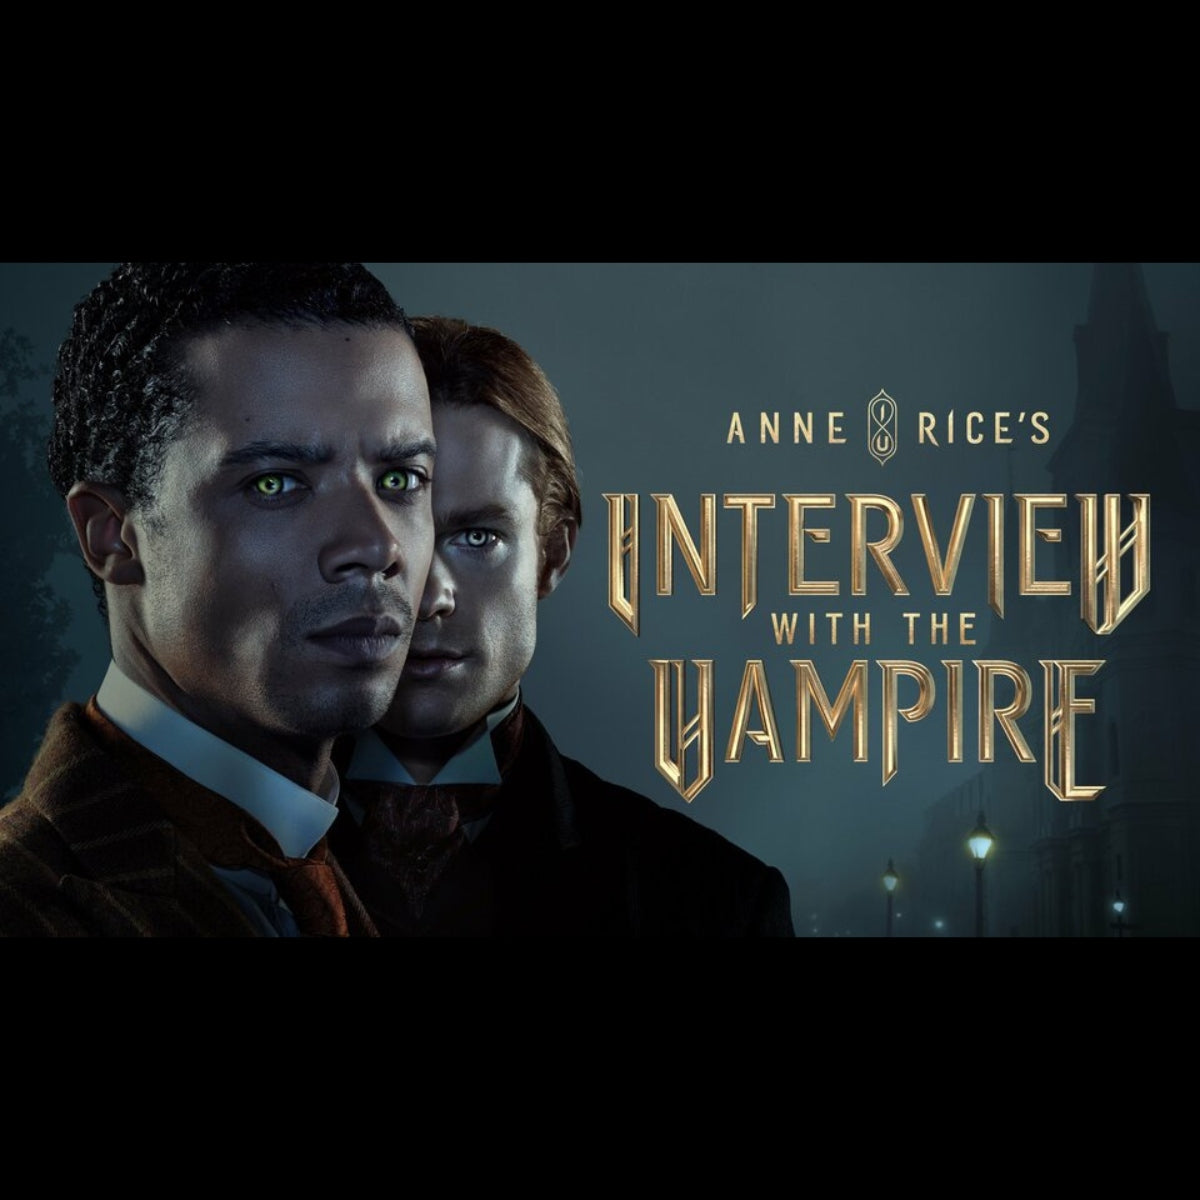 Biting Into Excitement: Season 2 of Interview with the Vampire - Release Date, Cast, and the Latest Buzz